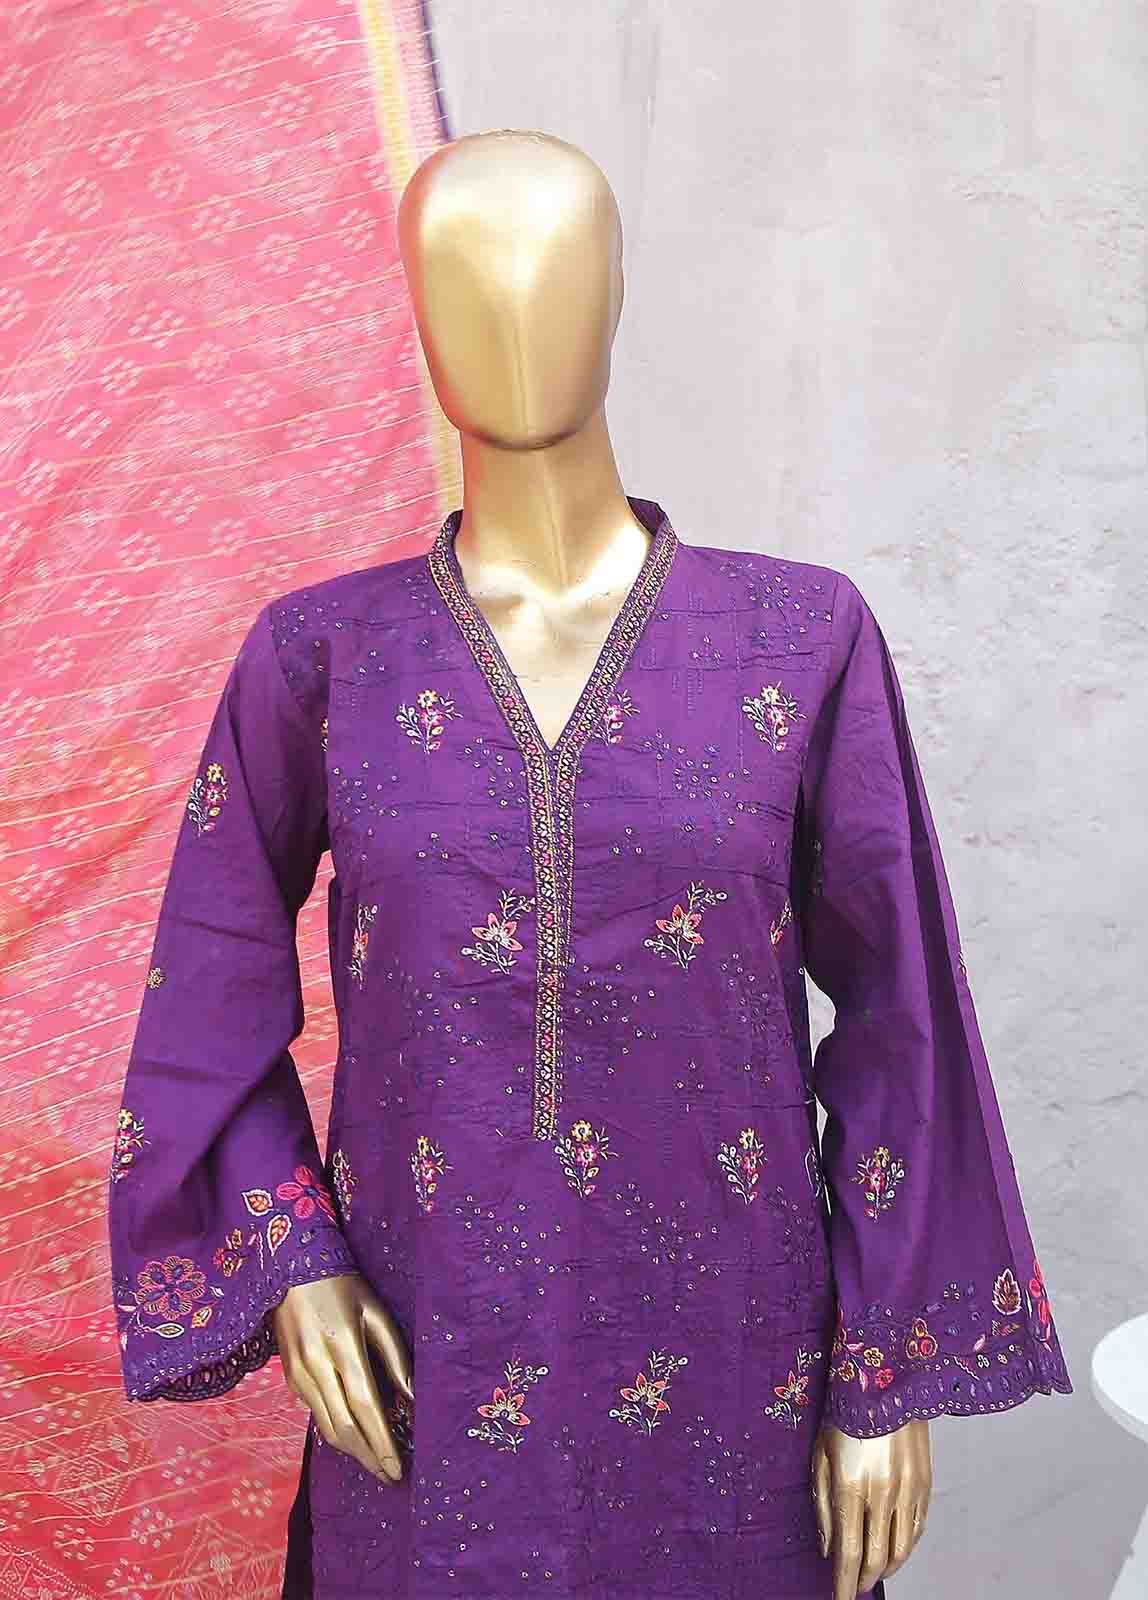 SMLF-0386-RN-3 Piece Cotton Embroidered collection